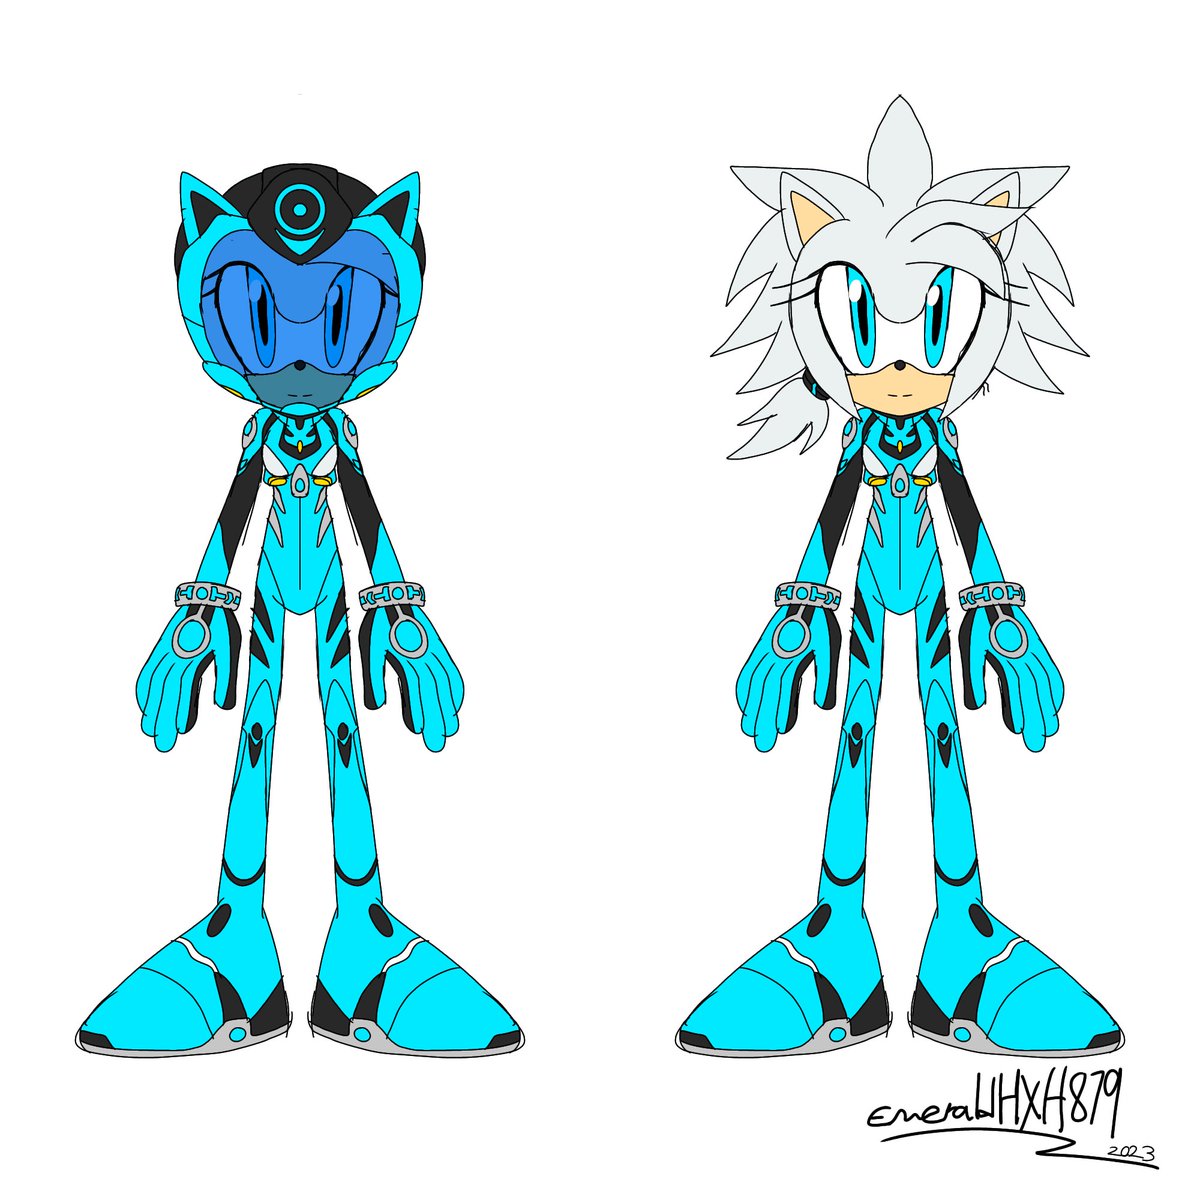 Himari Plugsuit design 
Something that I did for one of my OC Himari the Hedgehog in plugsuit since I was bored and have nothing to do. 
Suit design done by me and it was based from her clothes and also getting inspired from @speendlexmk2 plugsuit design of @Sapphire1X7 OCs.